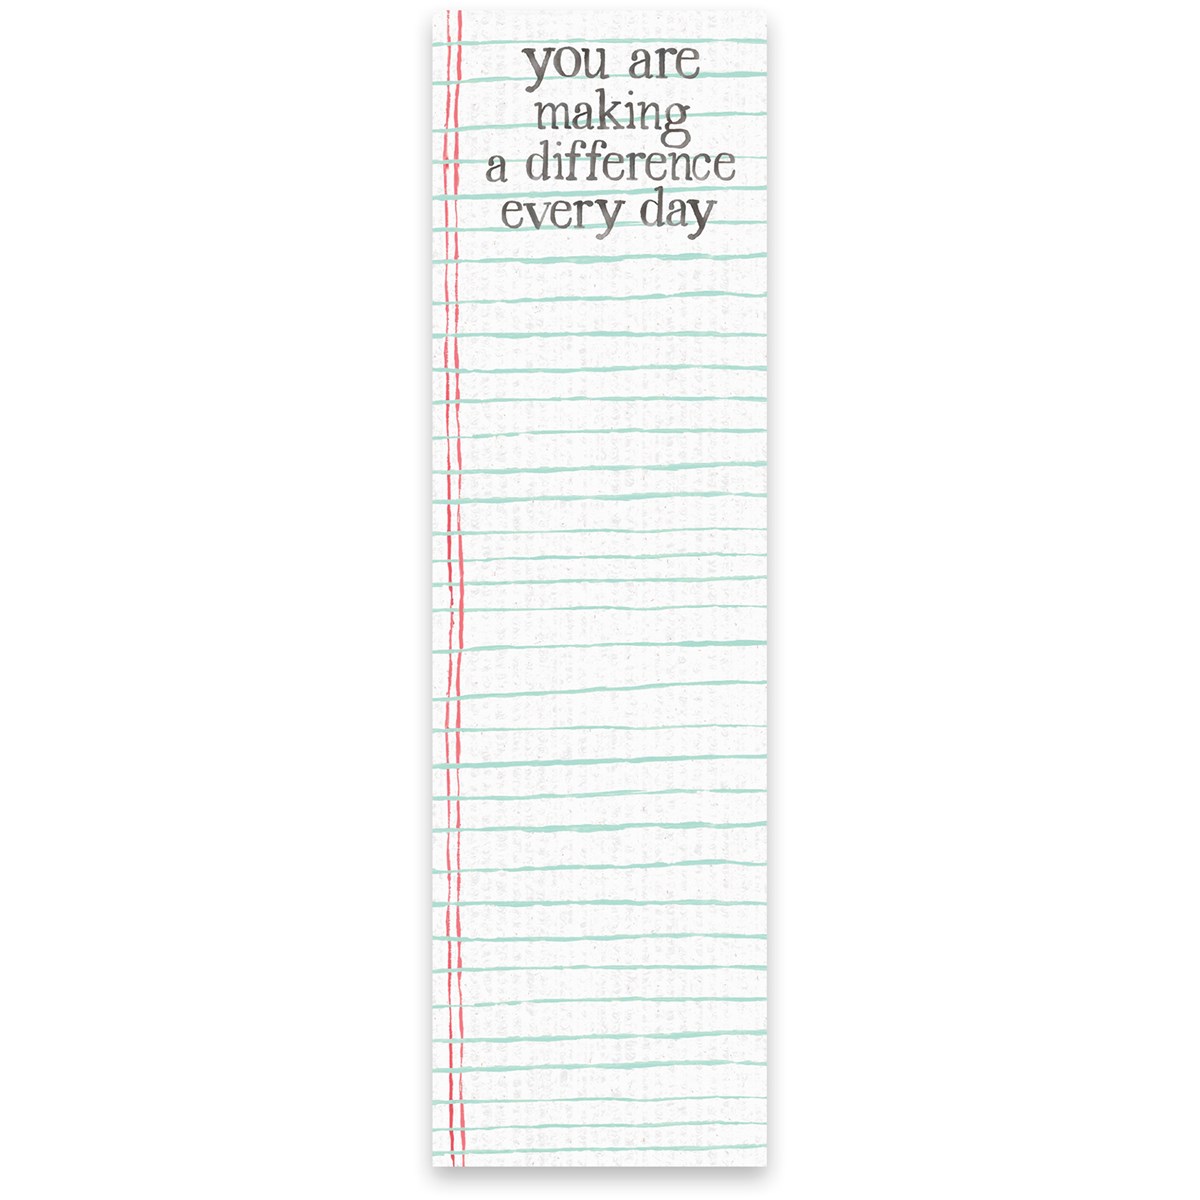 List Notepad - You Are Making A Difference - 2.75" x 9.50" x 0.25" - Paper, Magnet